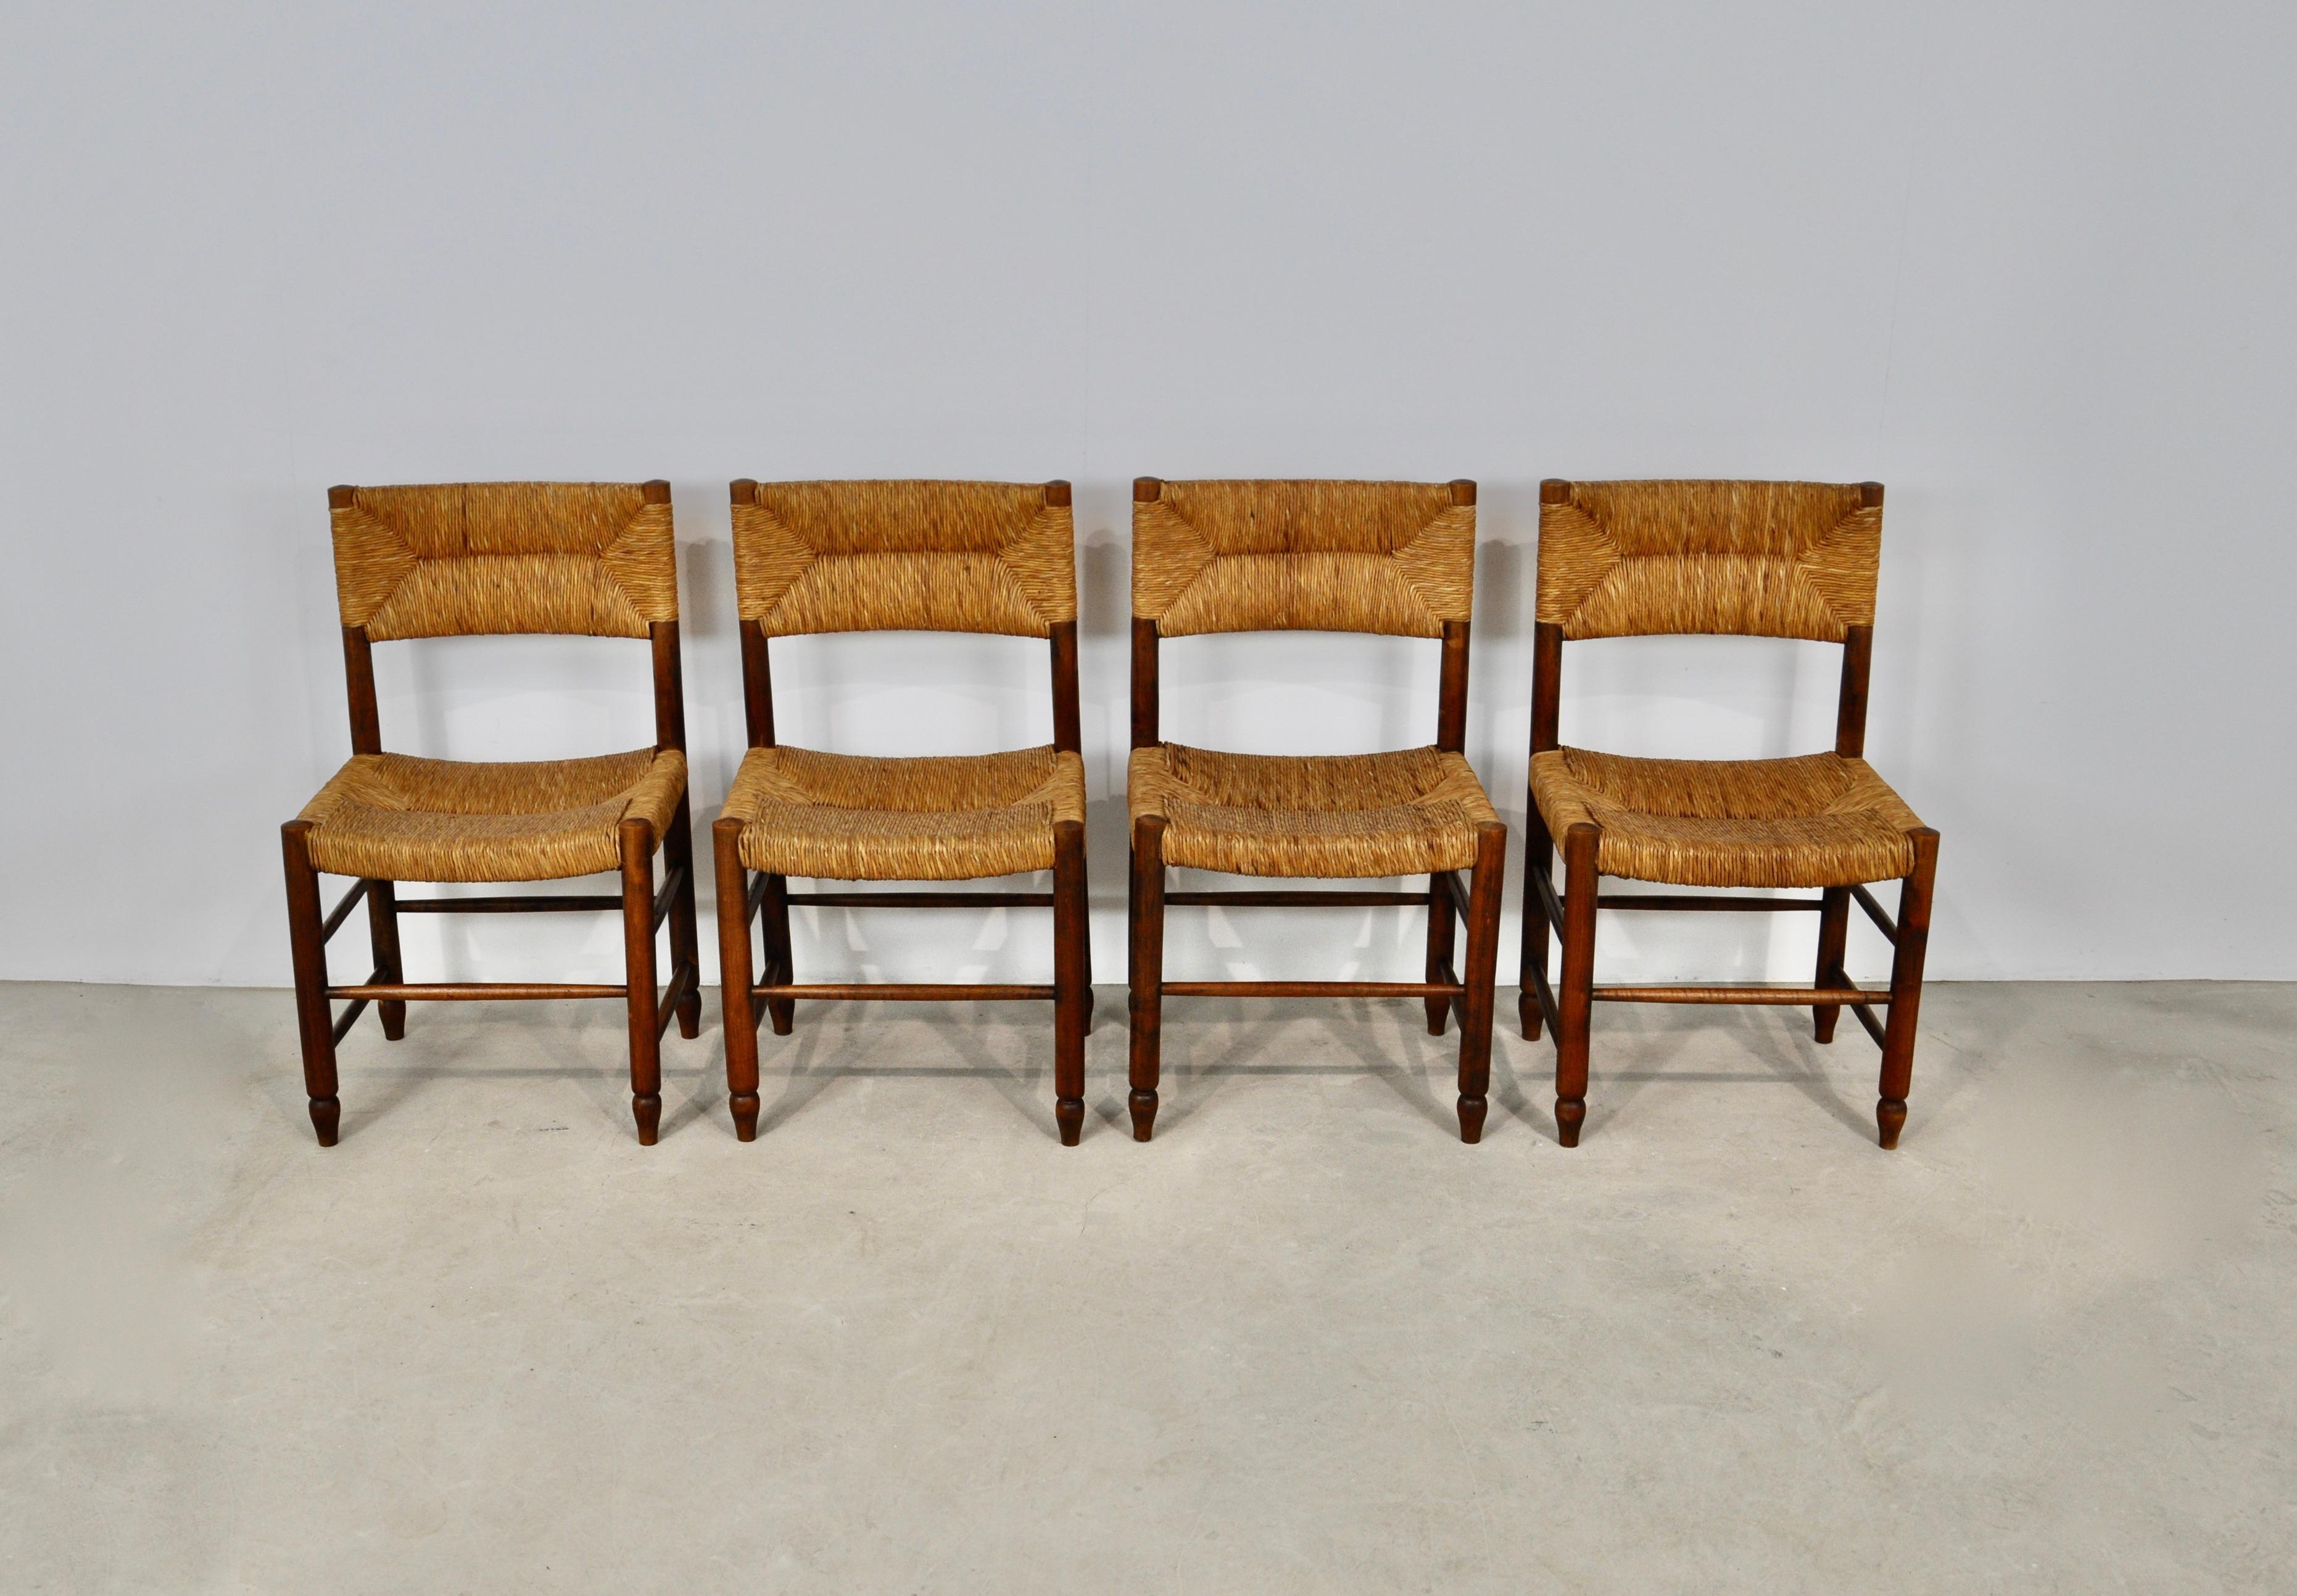 Set of 4 chairs in wood and mulch. Wear due to time and age of the chairs. Seat height 45cm.